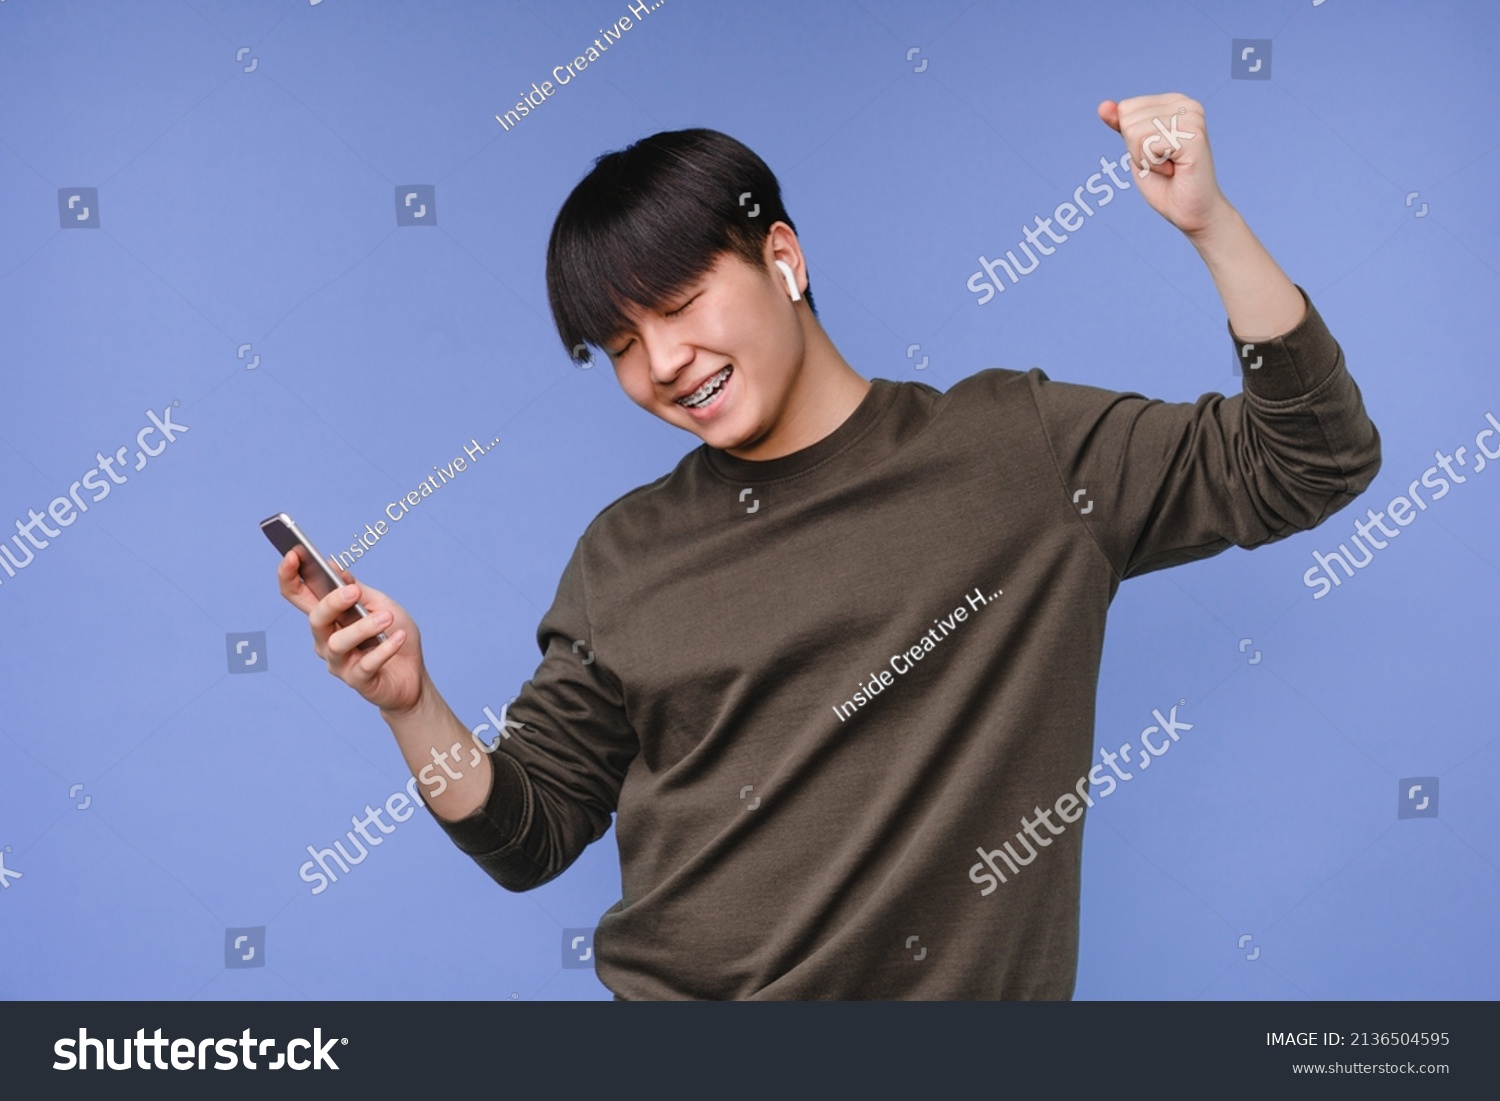 Dancing active asian korean young man boy student listening to the music on cellphone using earbuds, choosing soundtrack, playlist, radio isolated in blue background #2136504595